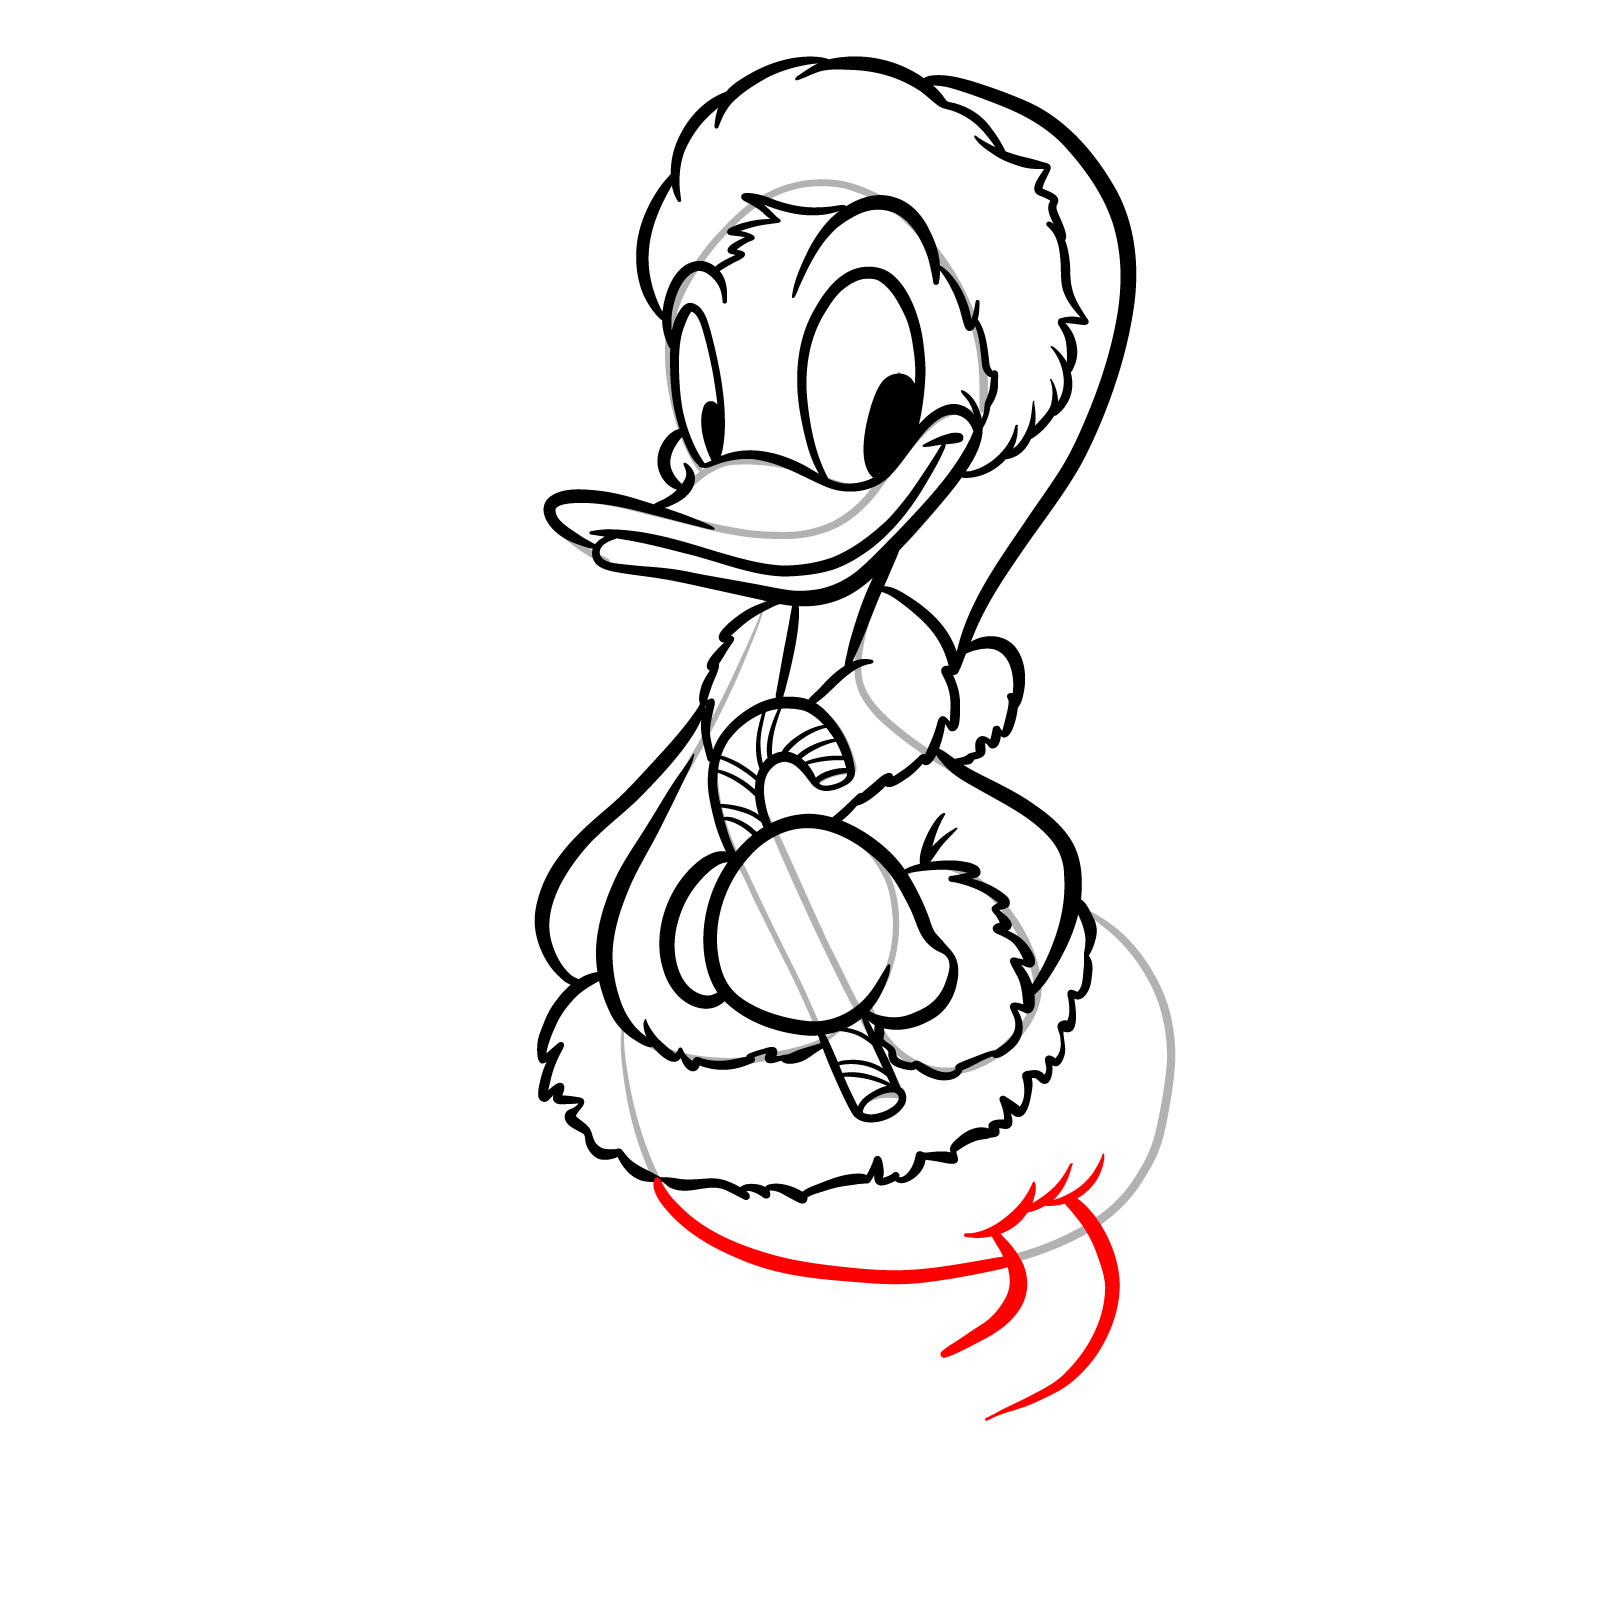 How to Draw Christmas Donald Duck - step 19